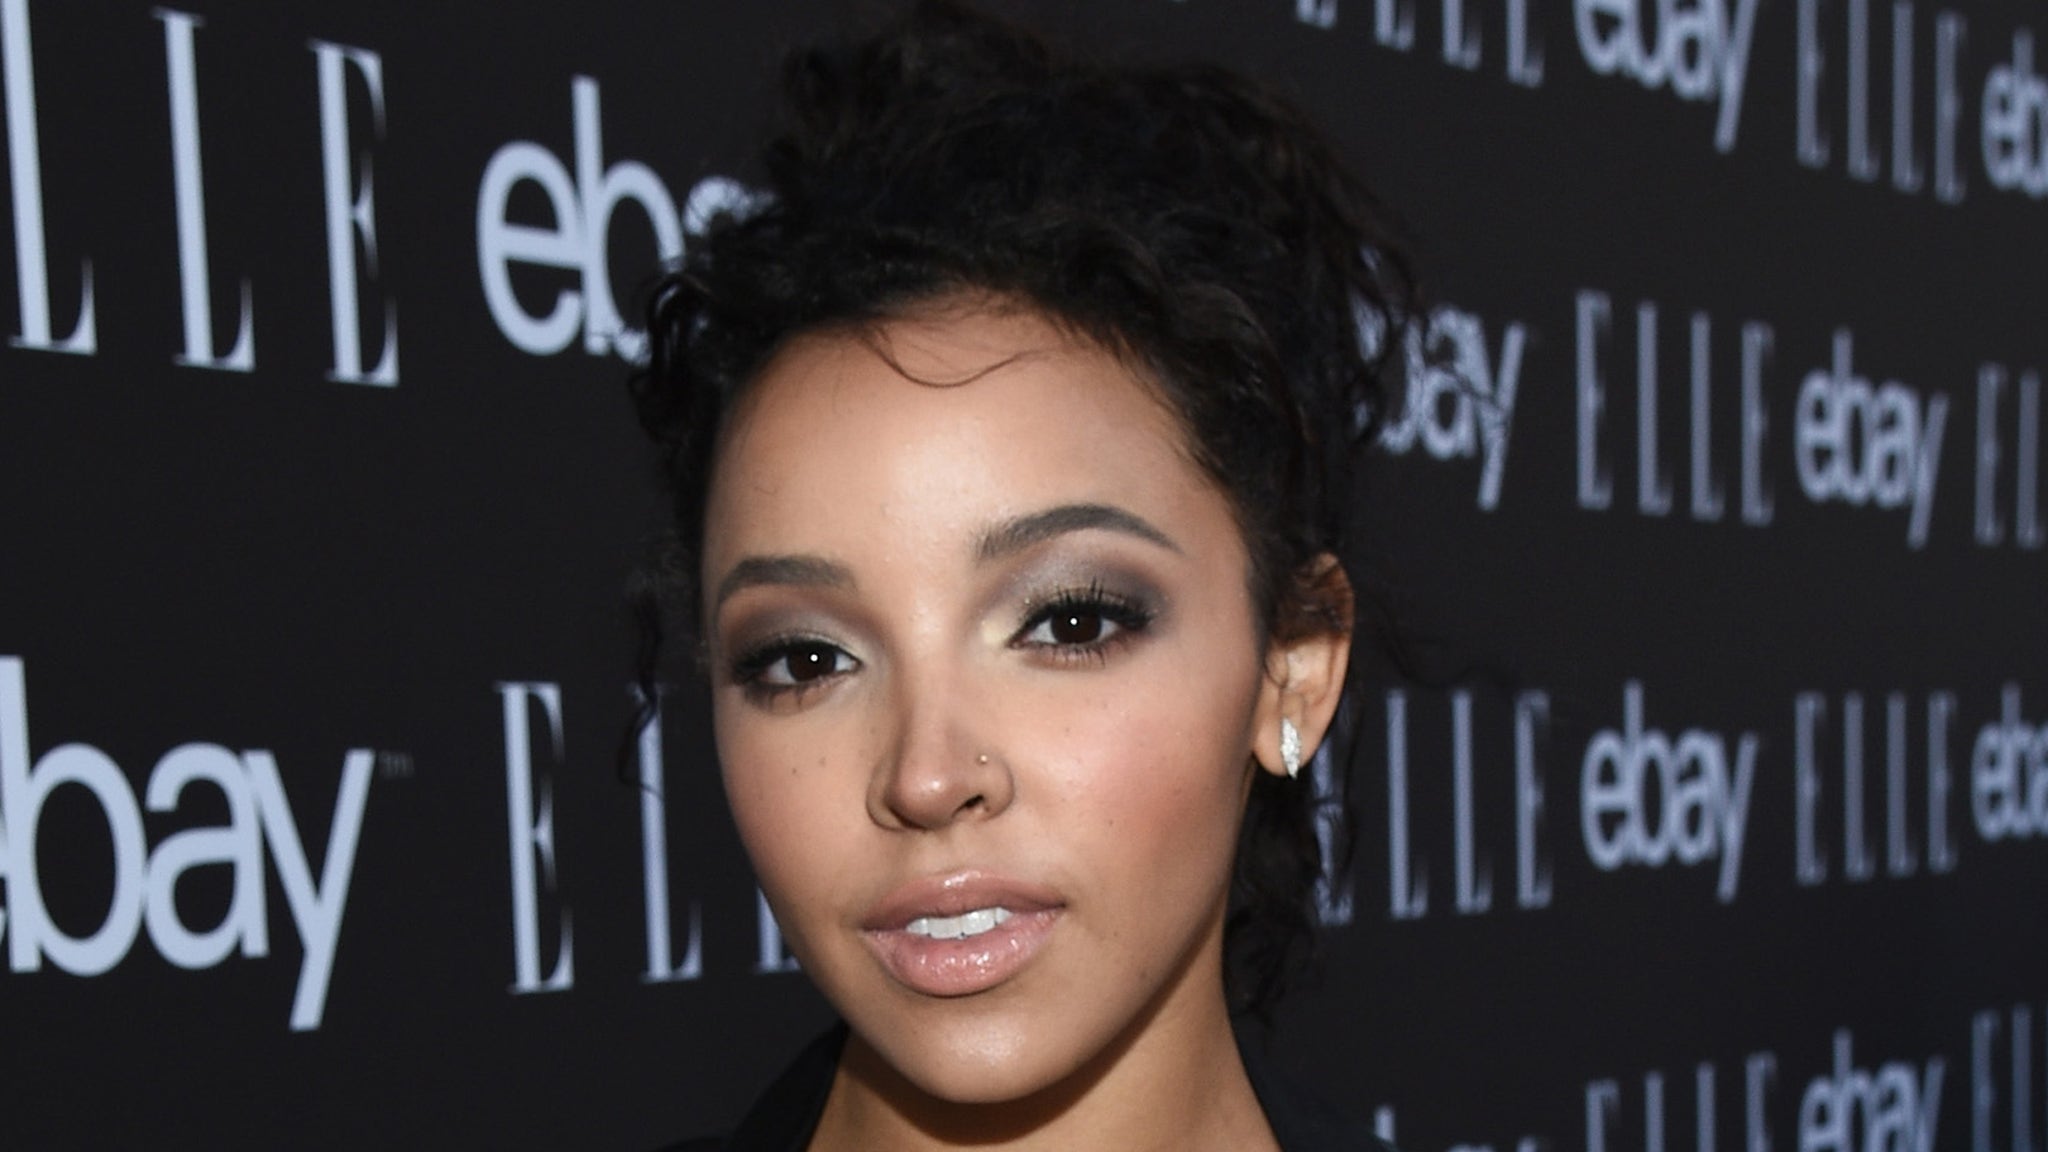 Tinashe Says The Black Community “Doesn't Fully Accept” Her